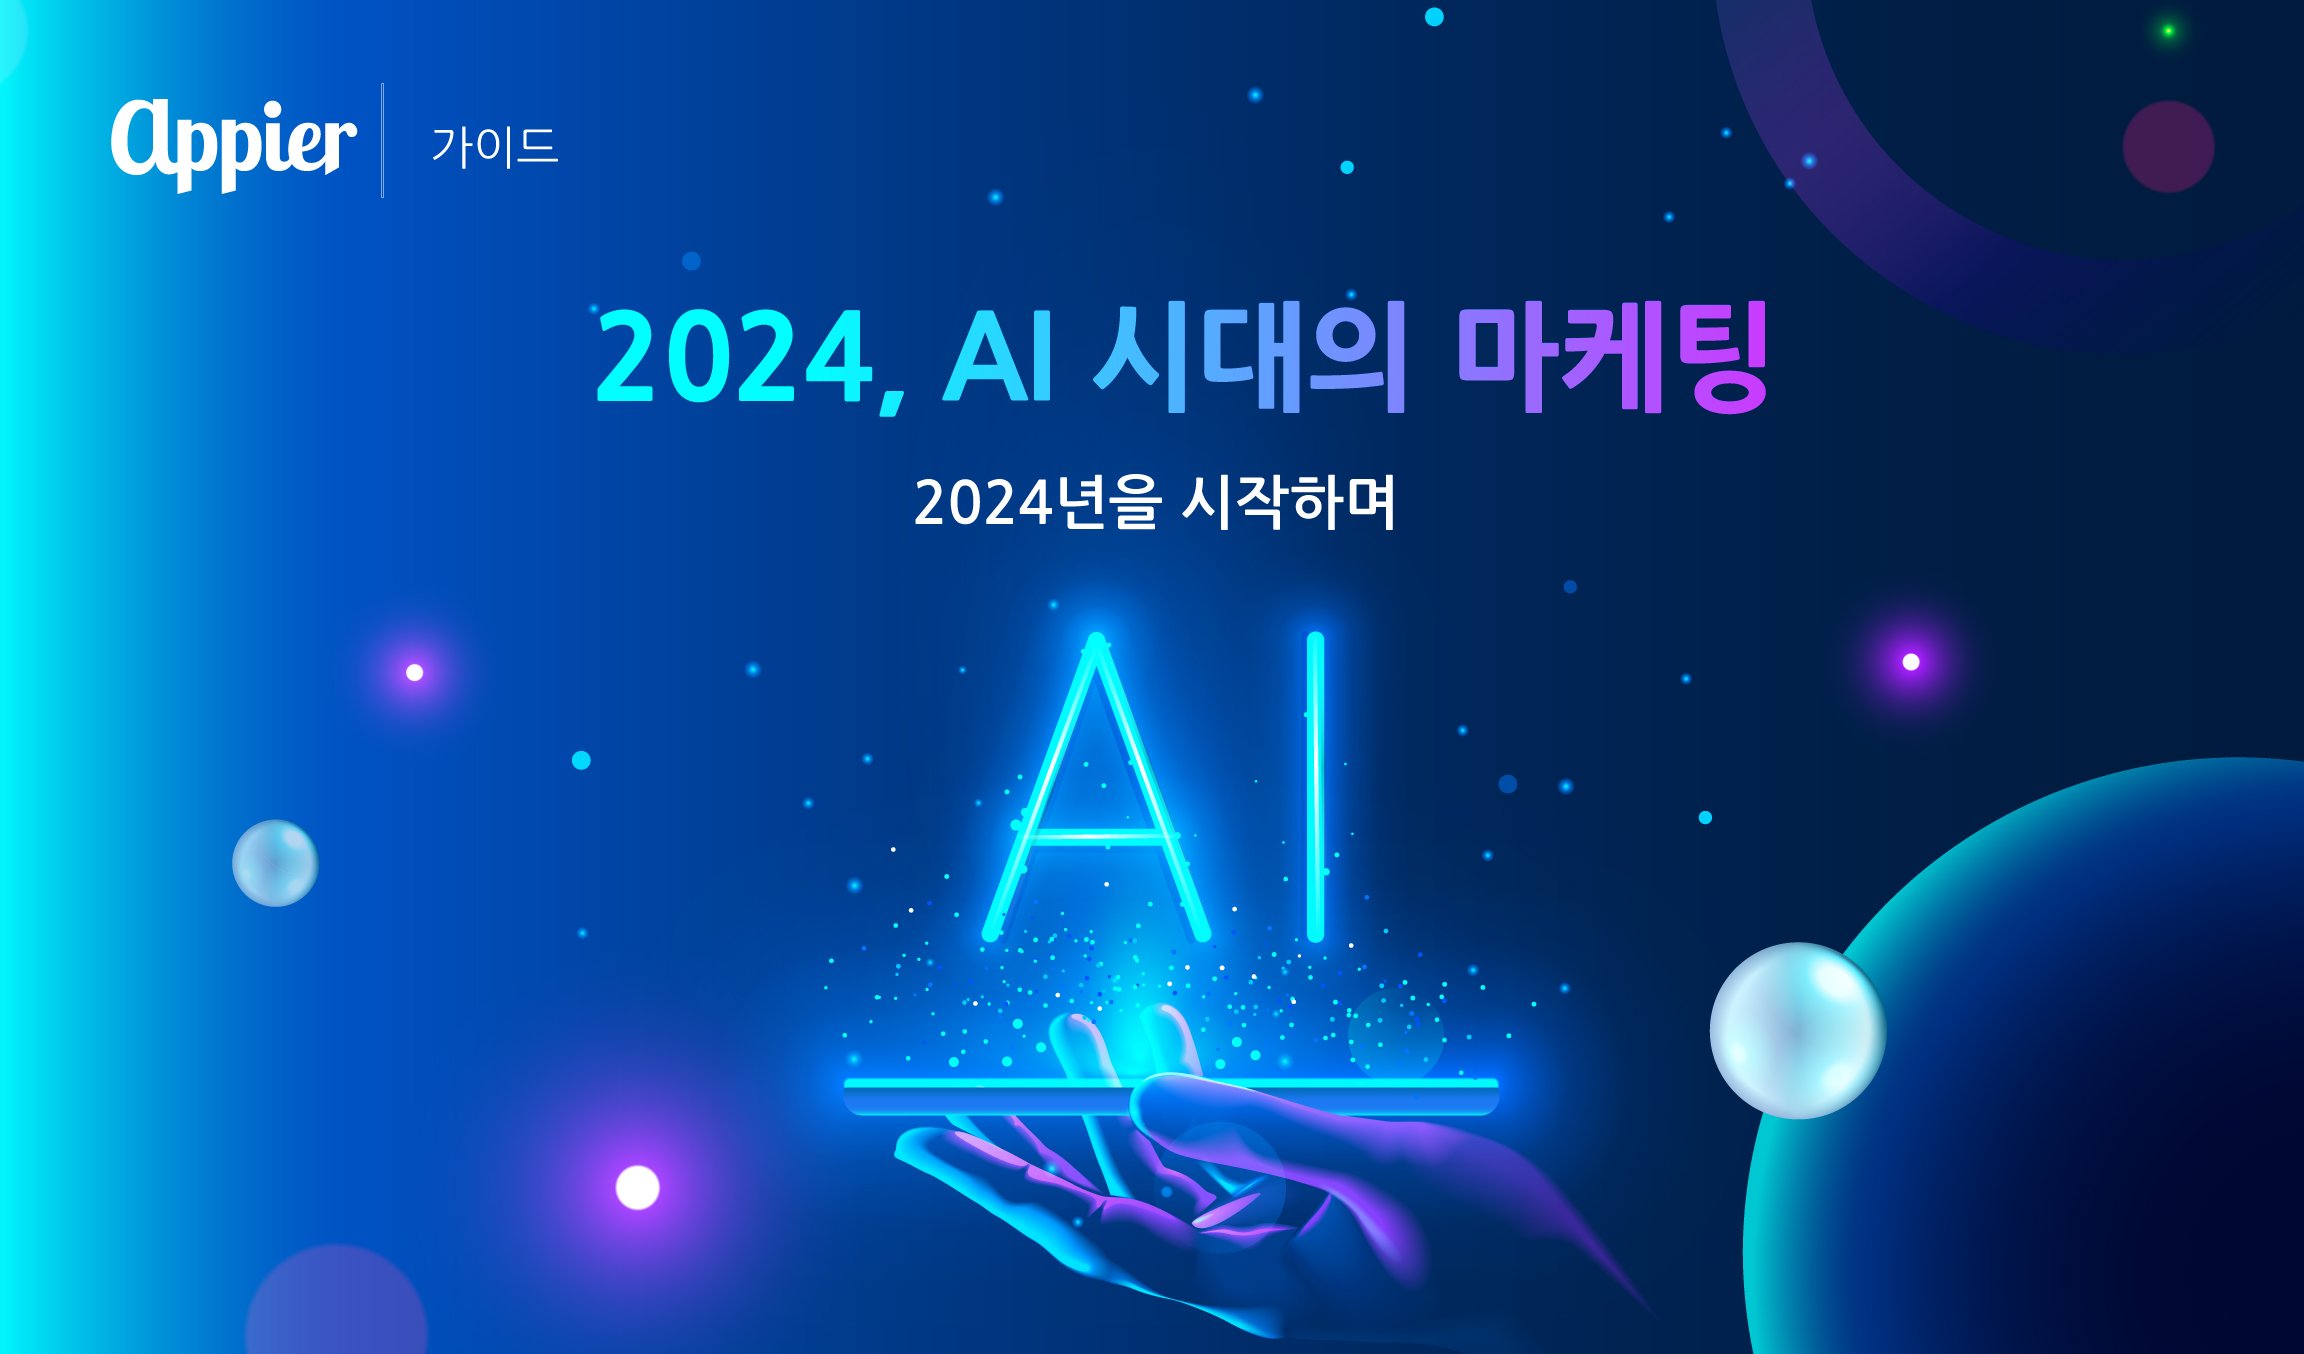 Marketing in the Age of AI_Header - KR